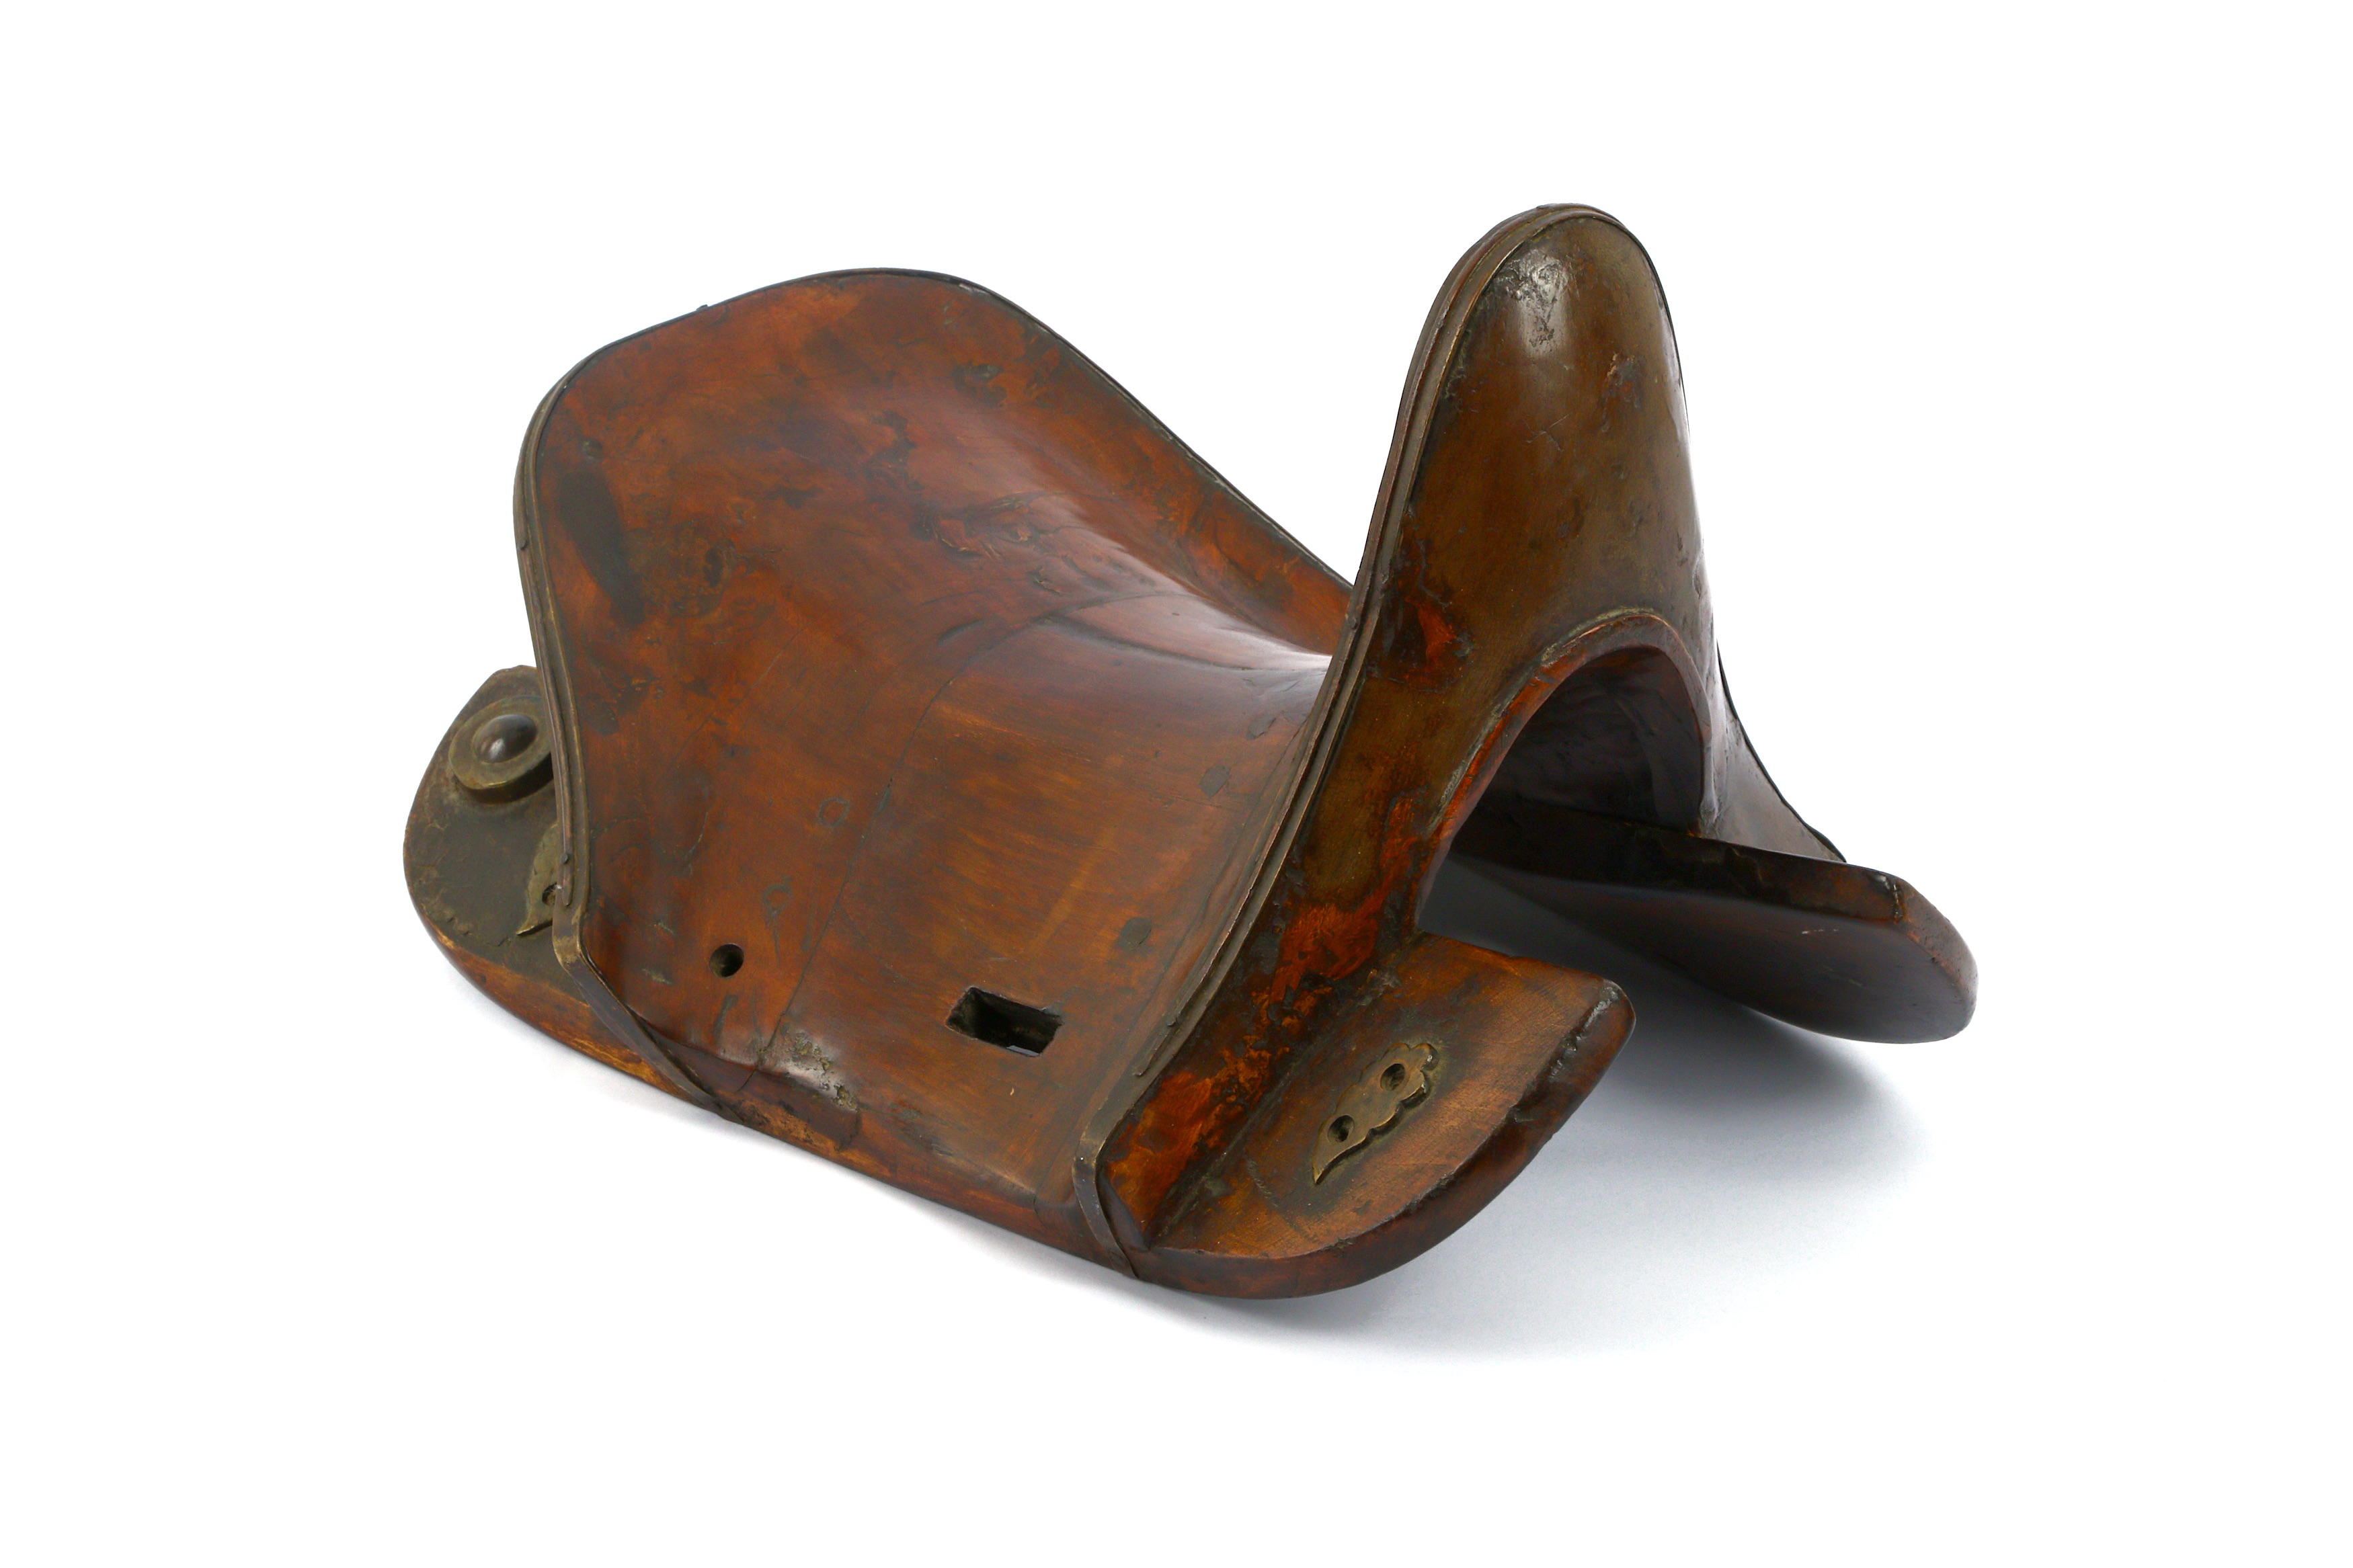 Lot 305 - A 19TH CENTURY HORSE SADDLE, OF A TYPE USED